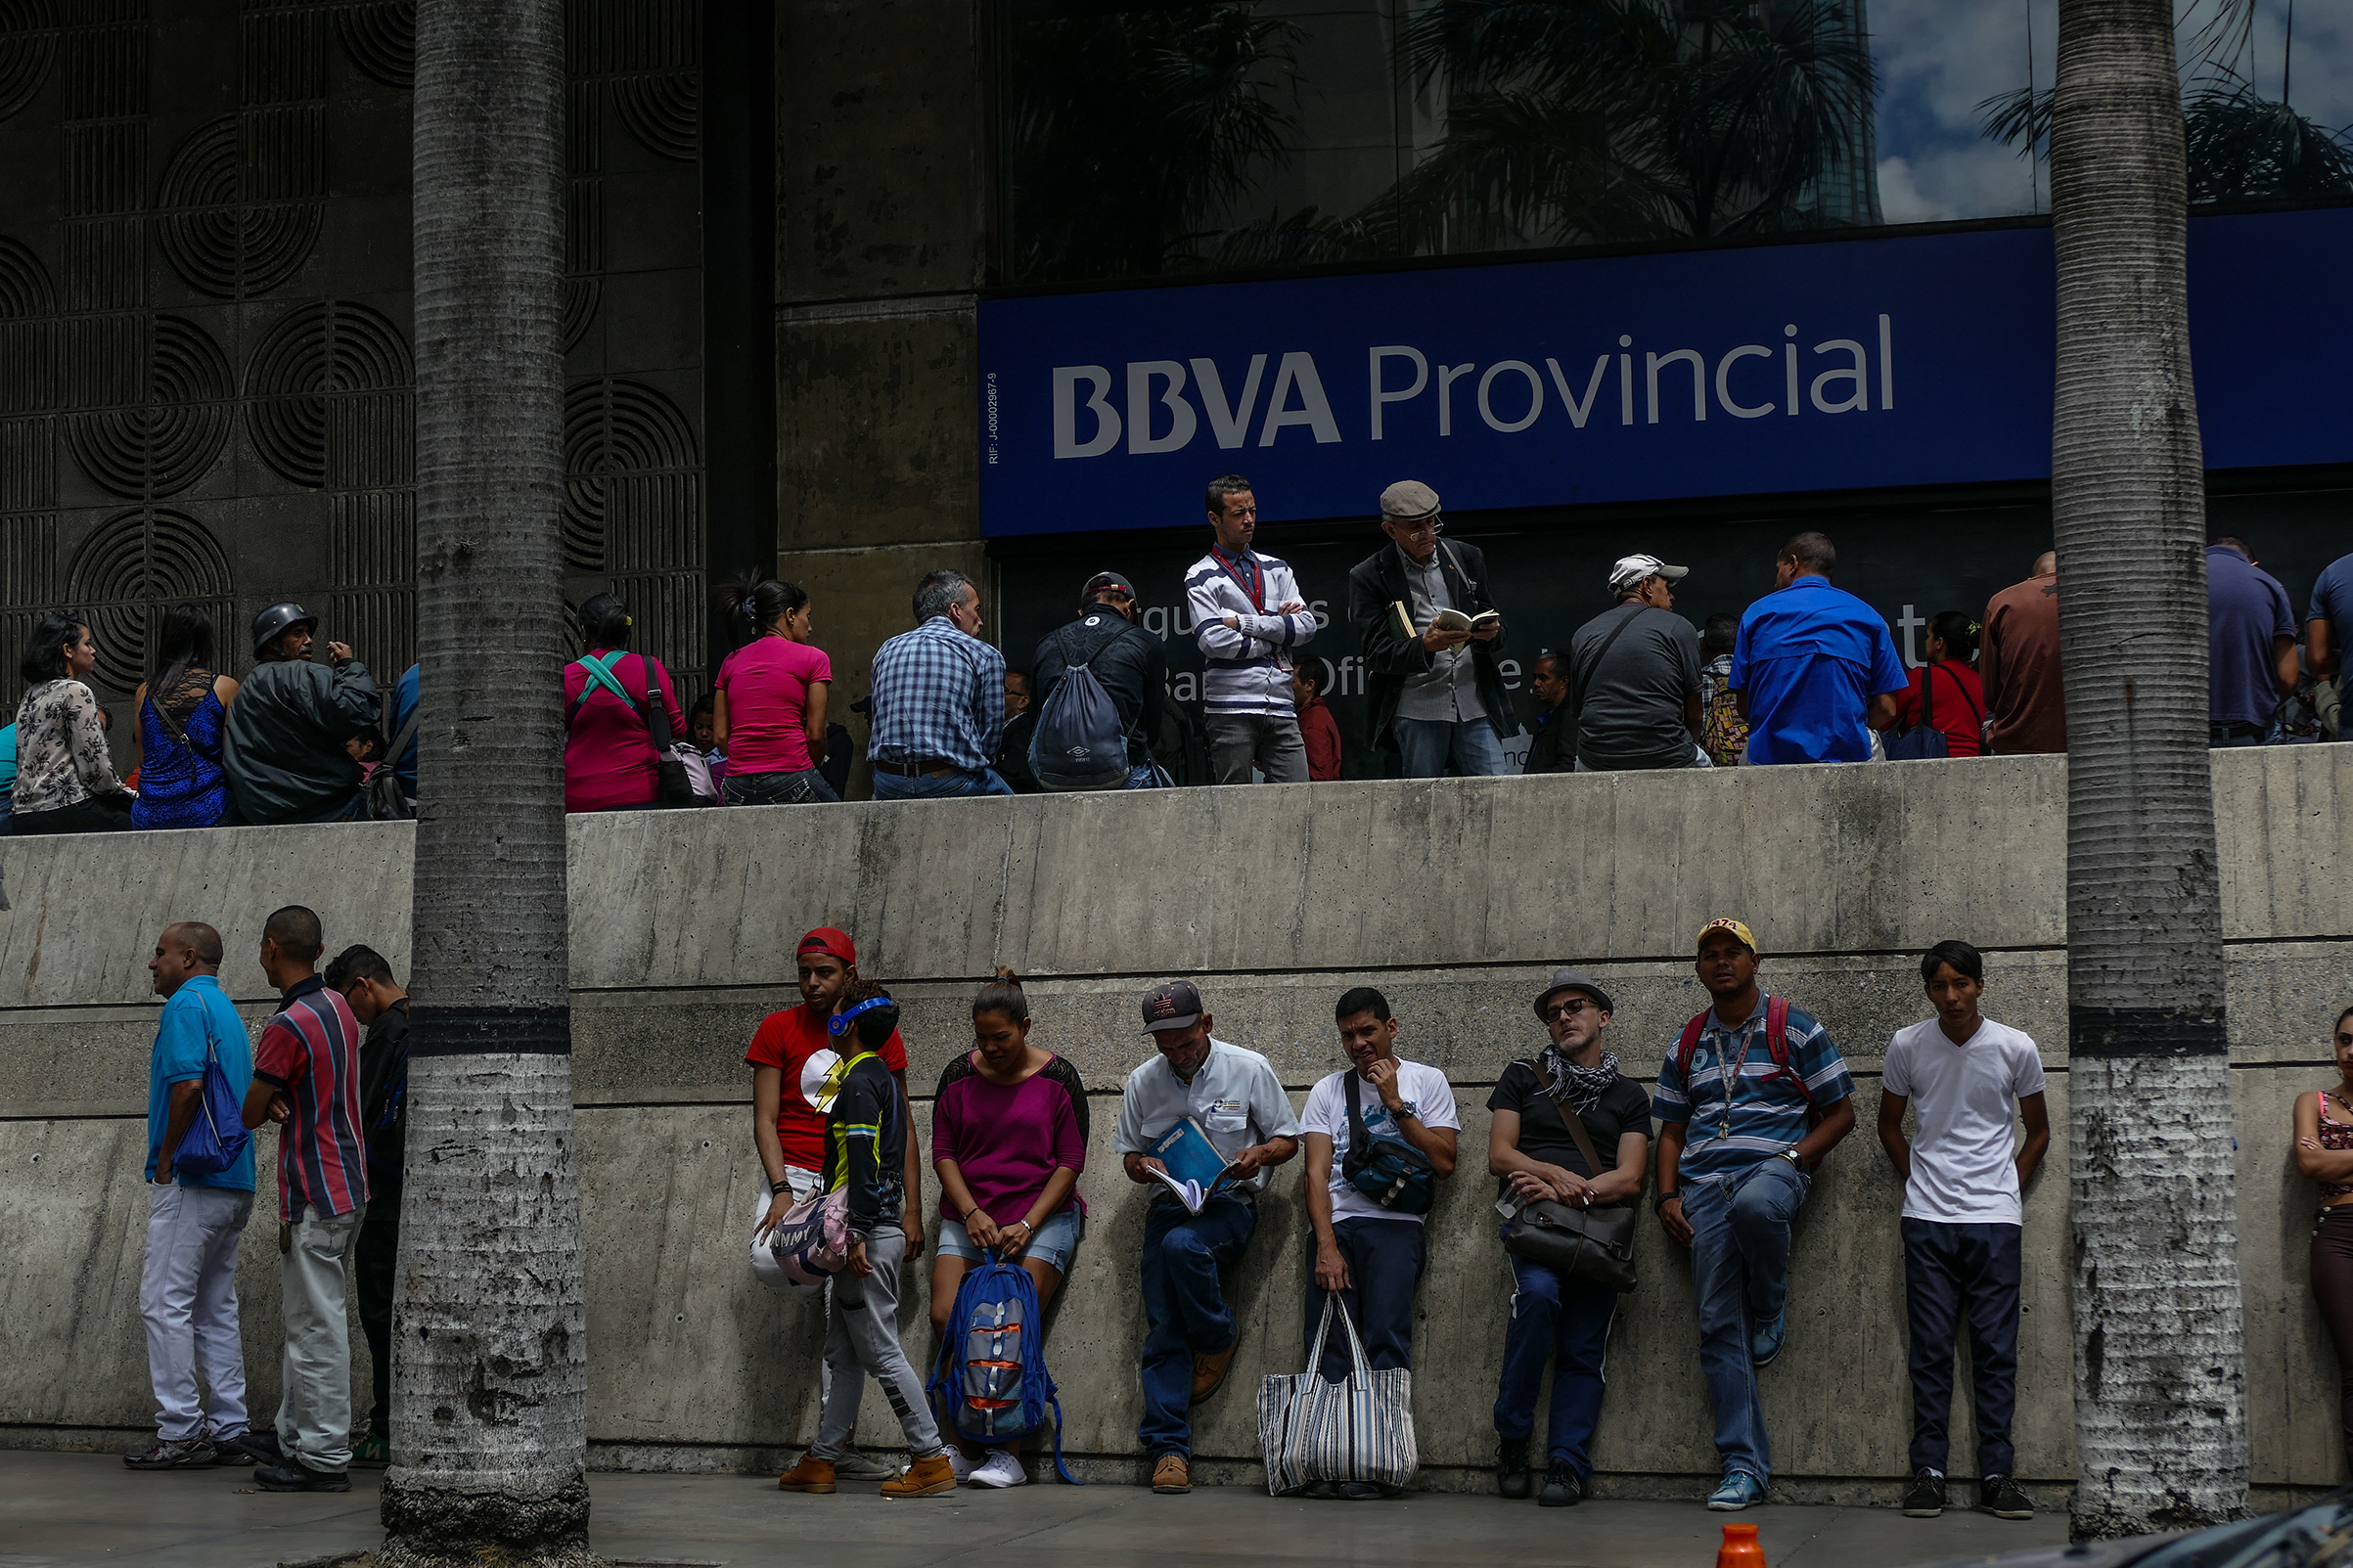 People wait to withdraw money from an ATM at a bank in Caracas on Feb. 21, 2018. (Roman Camacho—SOPA Images/LightRocket/Getty Images)